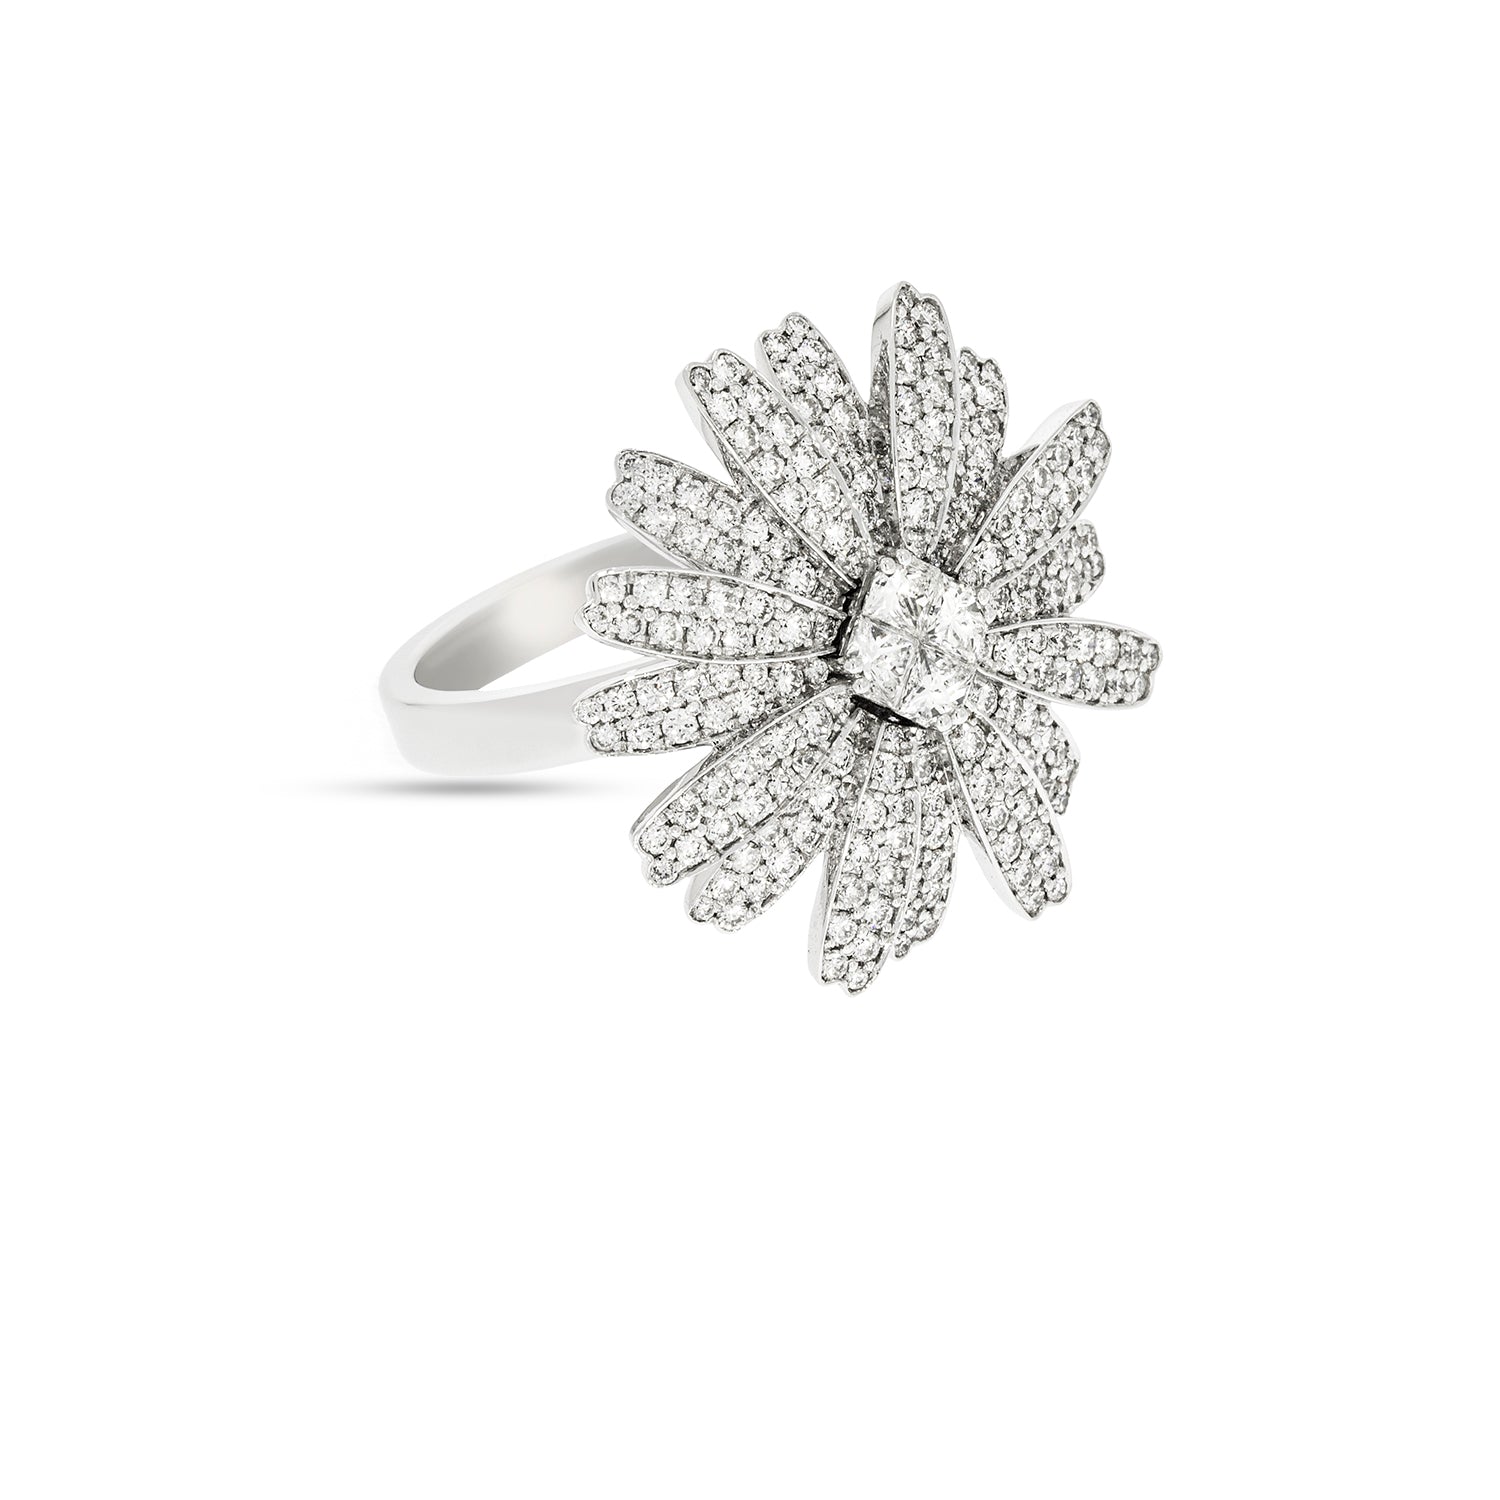 Milgrain Flower Halo Diamond Engagement Ring with Round Cut Diamond in 14KT  White Gold | With Clarity